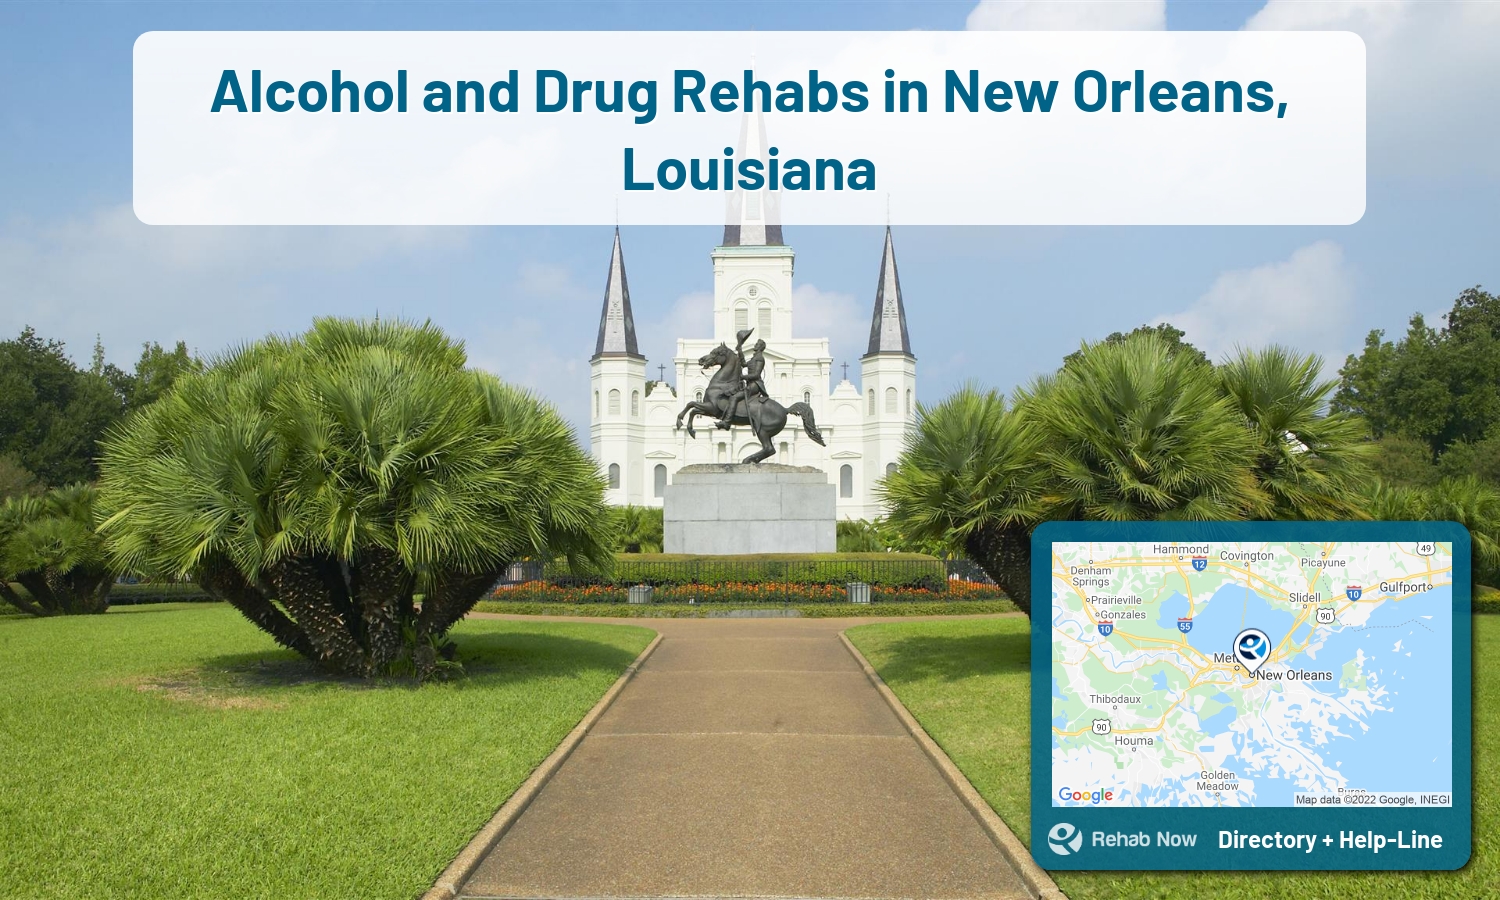 New Orleans, LA Treatment Centers. Find drug rehab in New Orleans, Louisiana, or detox and treatment programs. Get the right help now!